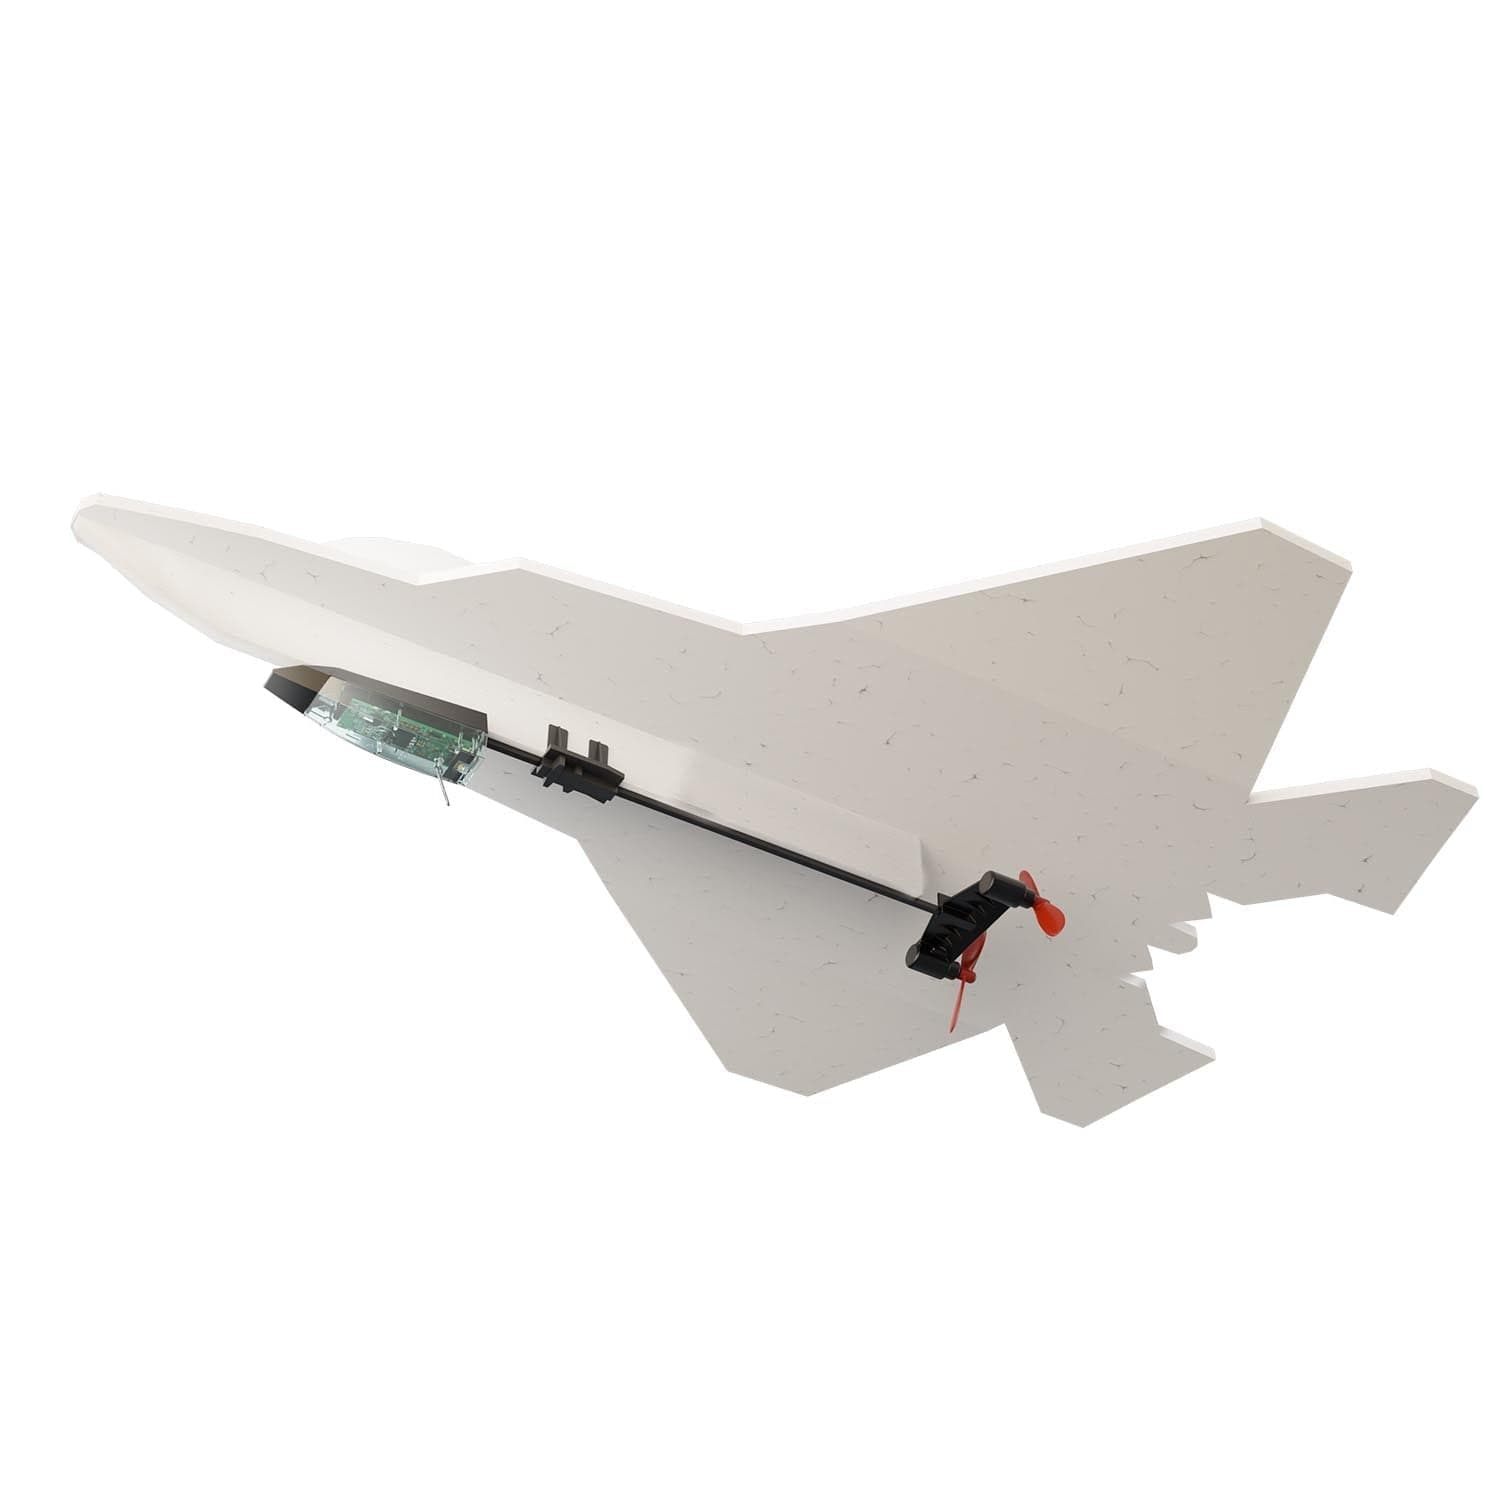 F22 RAPTOR WITH POWERUP 4.0 AIRPLANE (12 COUNT)